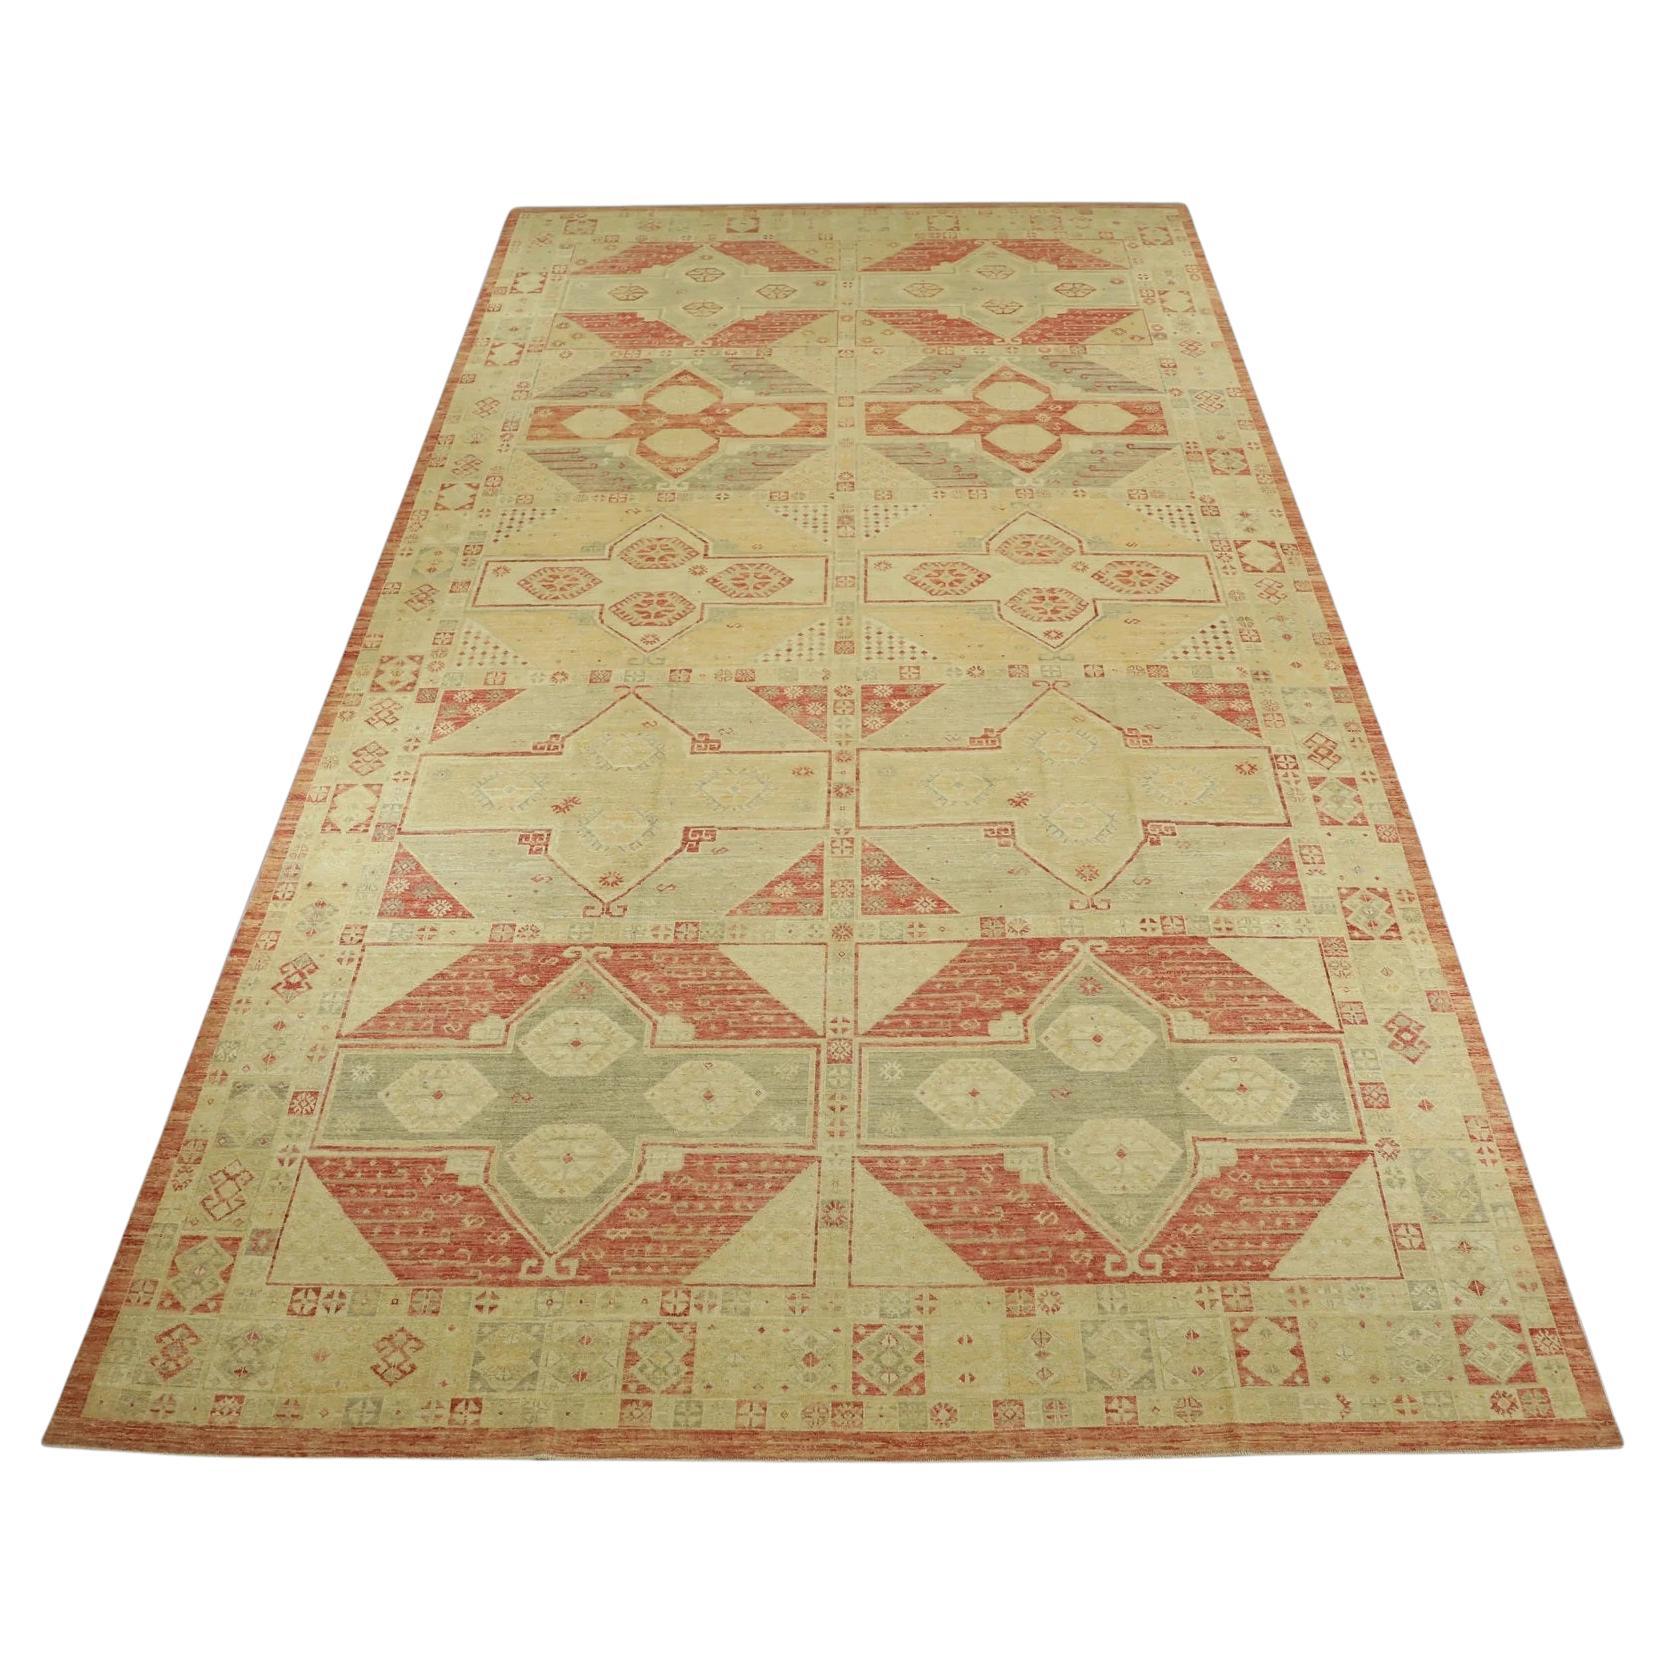 Red & Beige Turkish Finewoven Wool Oushak Rug 11' x 19'9" For Sale